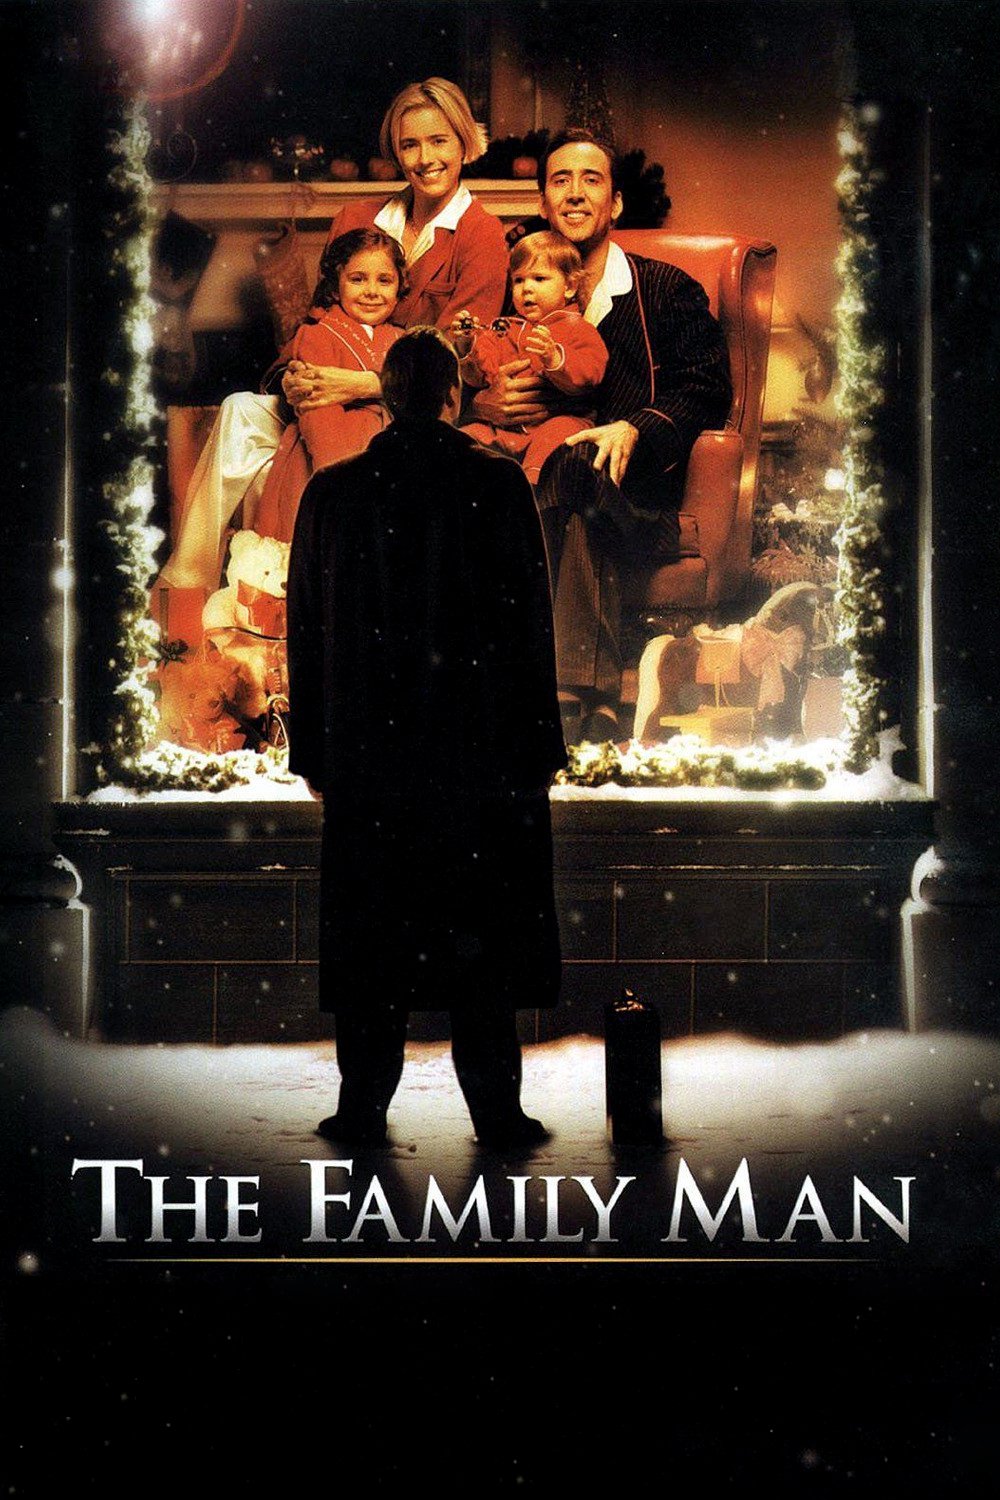 Poster for the movie "The Family Man"